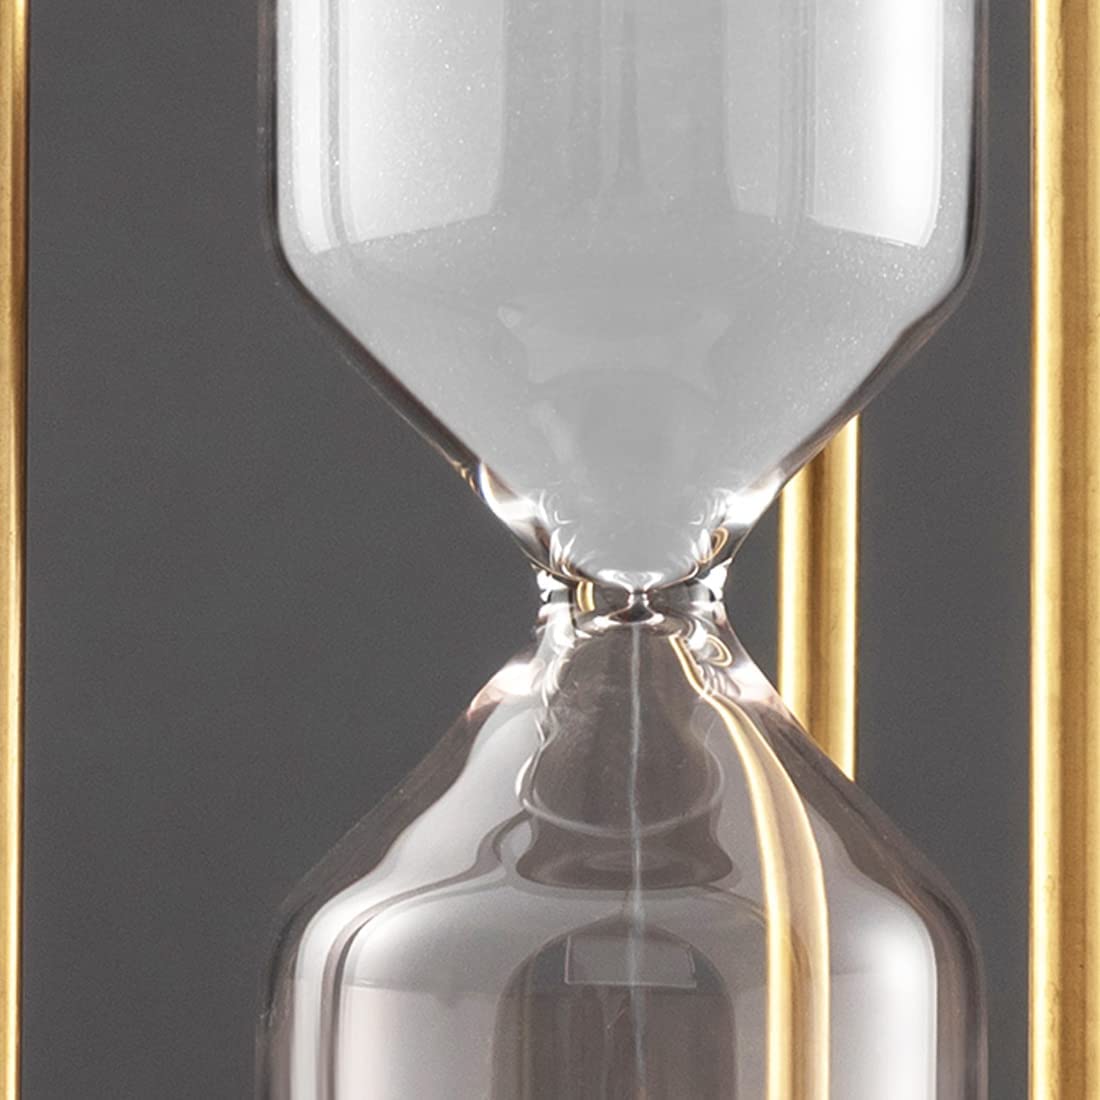 Brass Hourglass can help you stay focused and productive for longer.